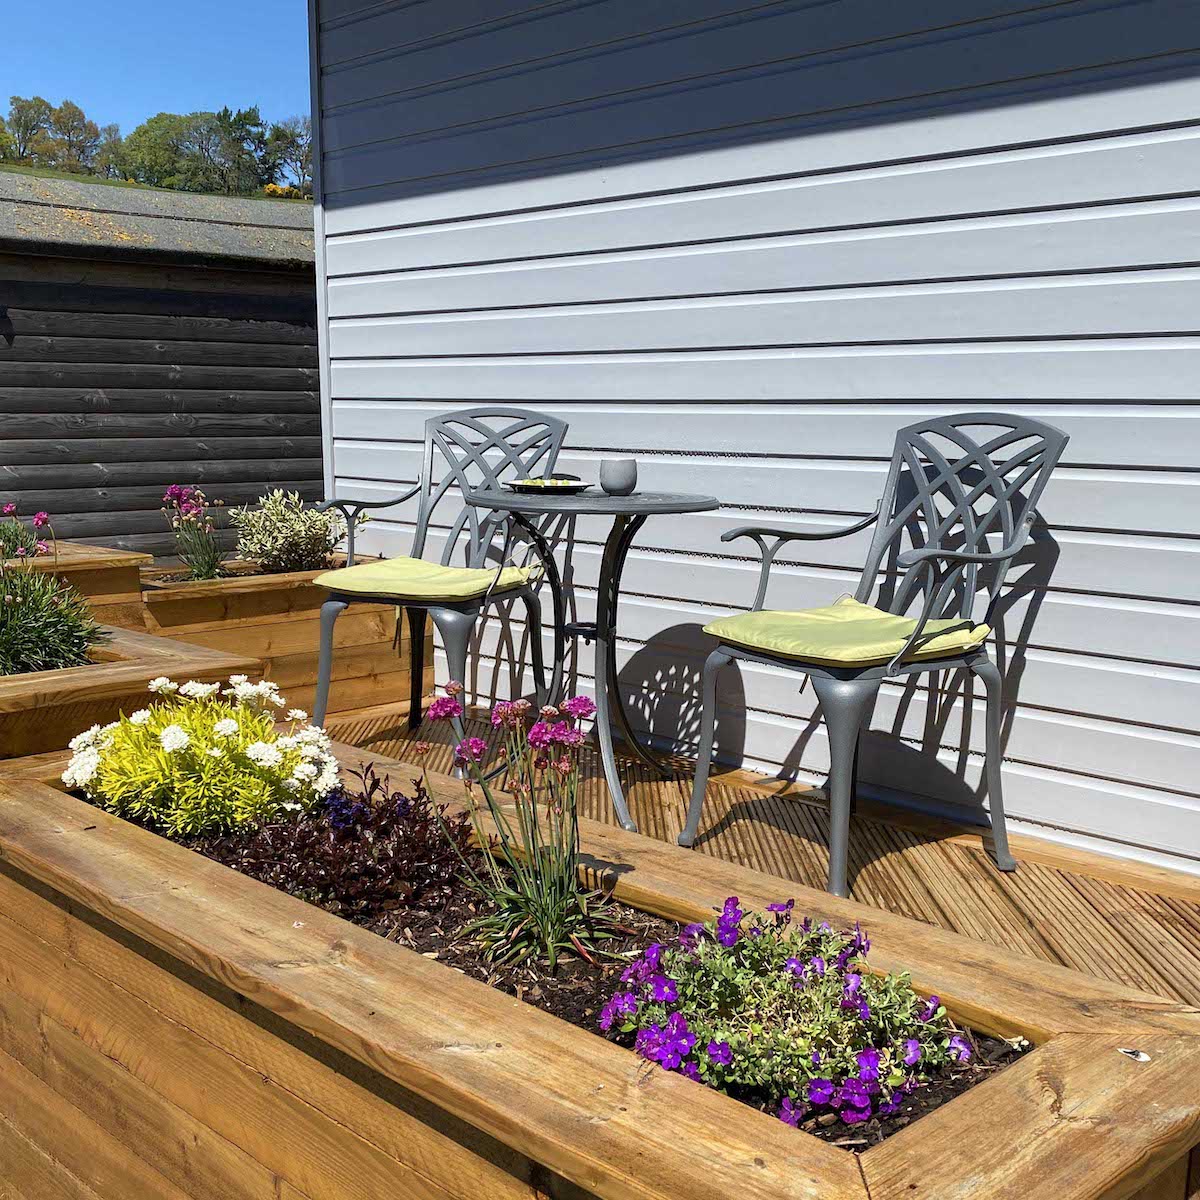 What is the difference between wood and composite decking?